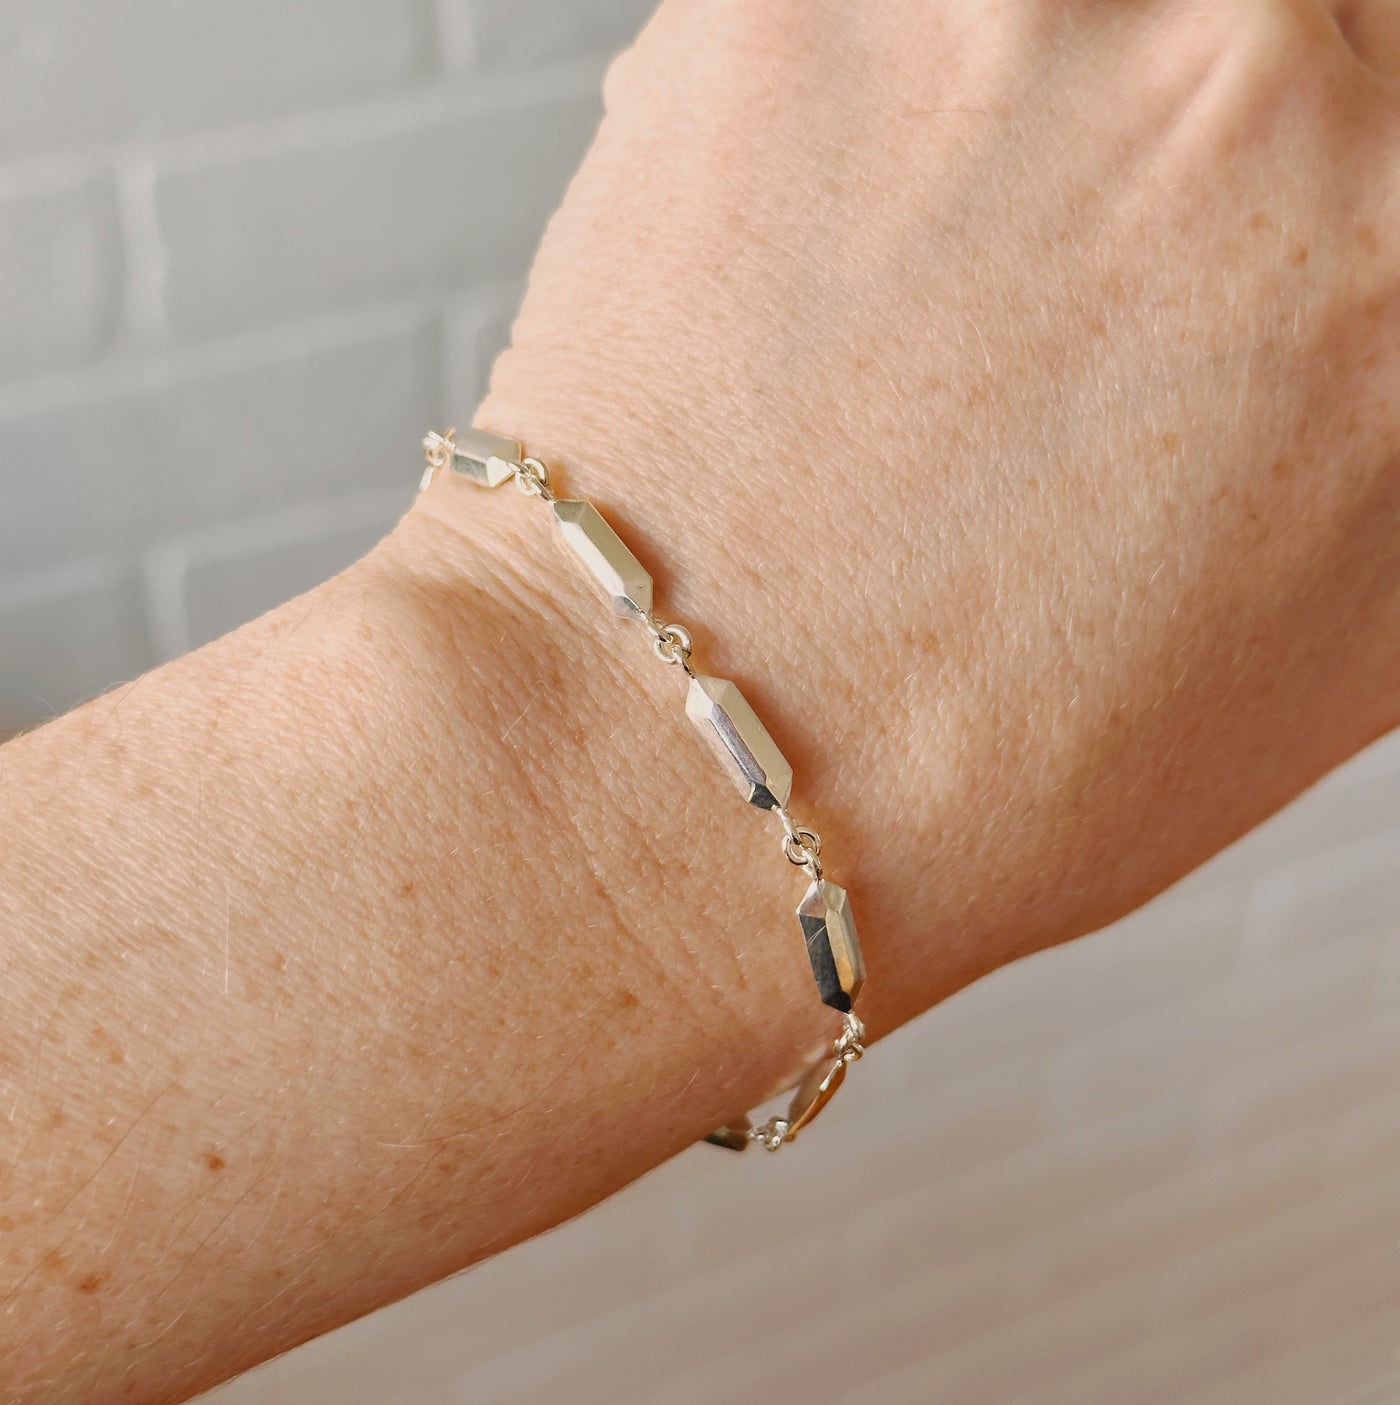 Fragment Link Bracelet in Silver modeled on a wrist in front of a white background